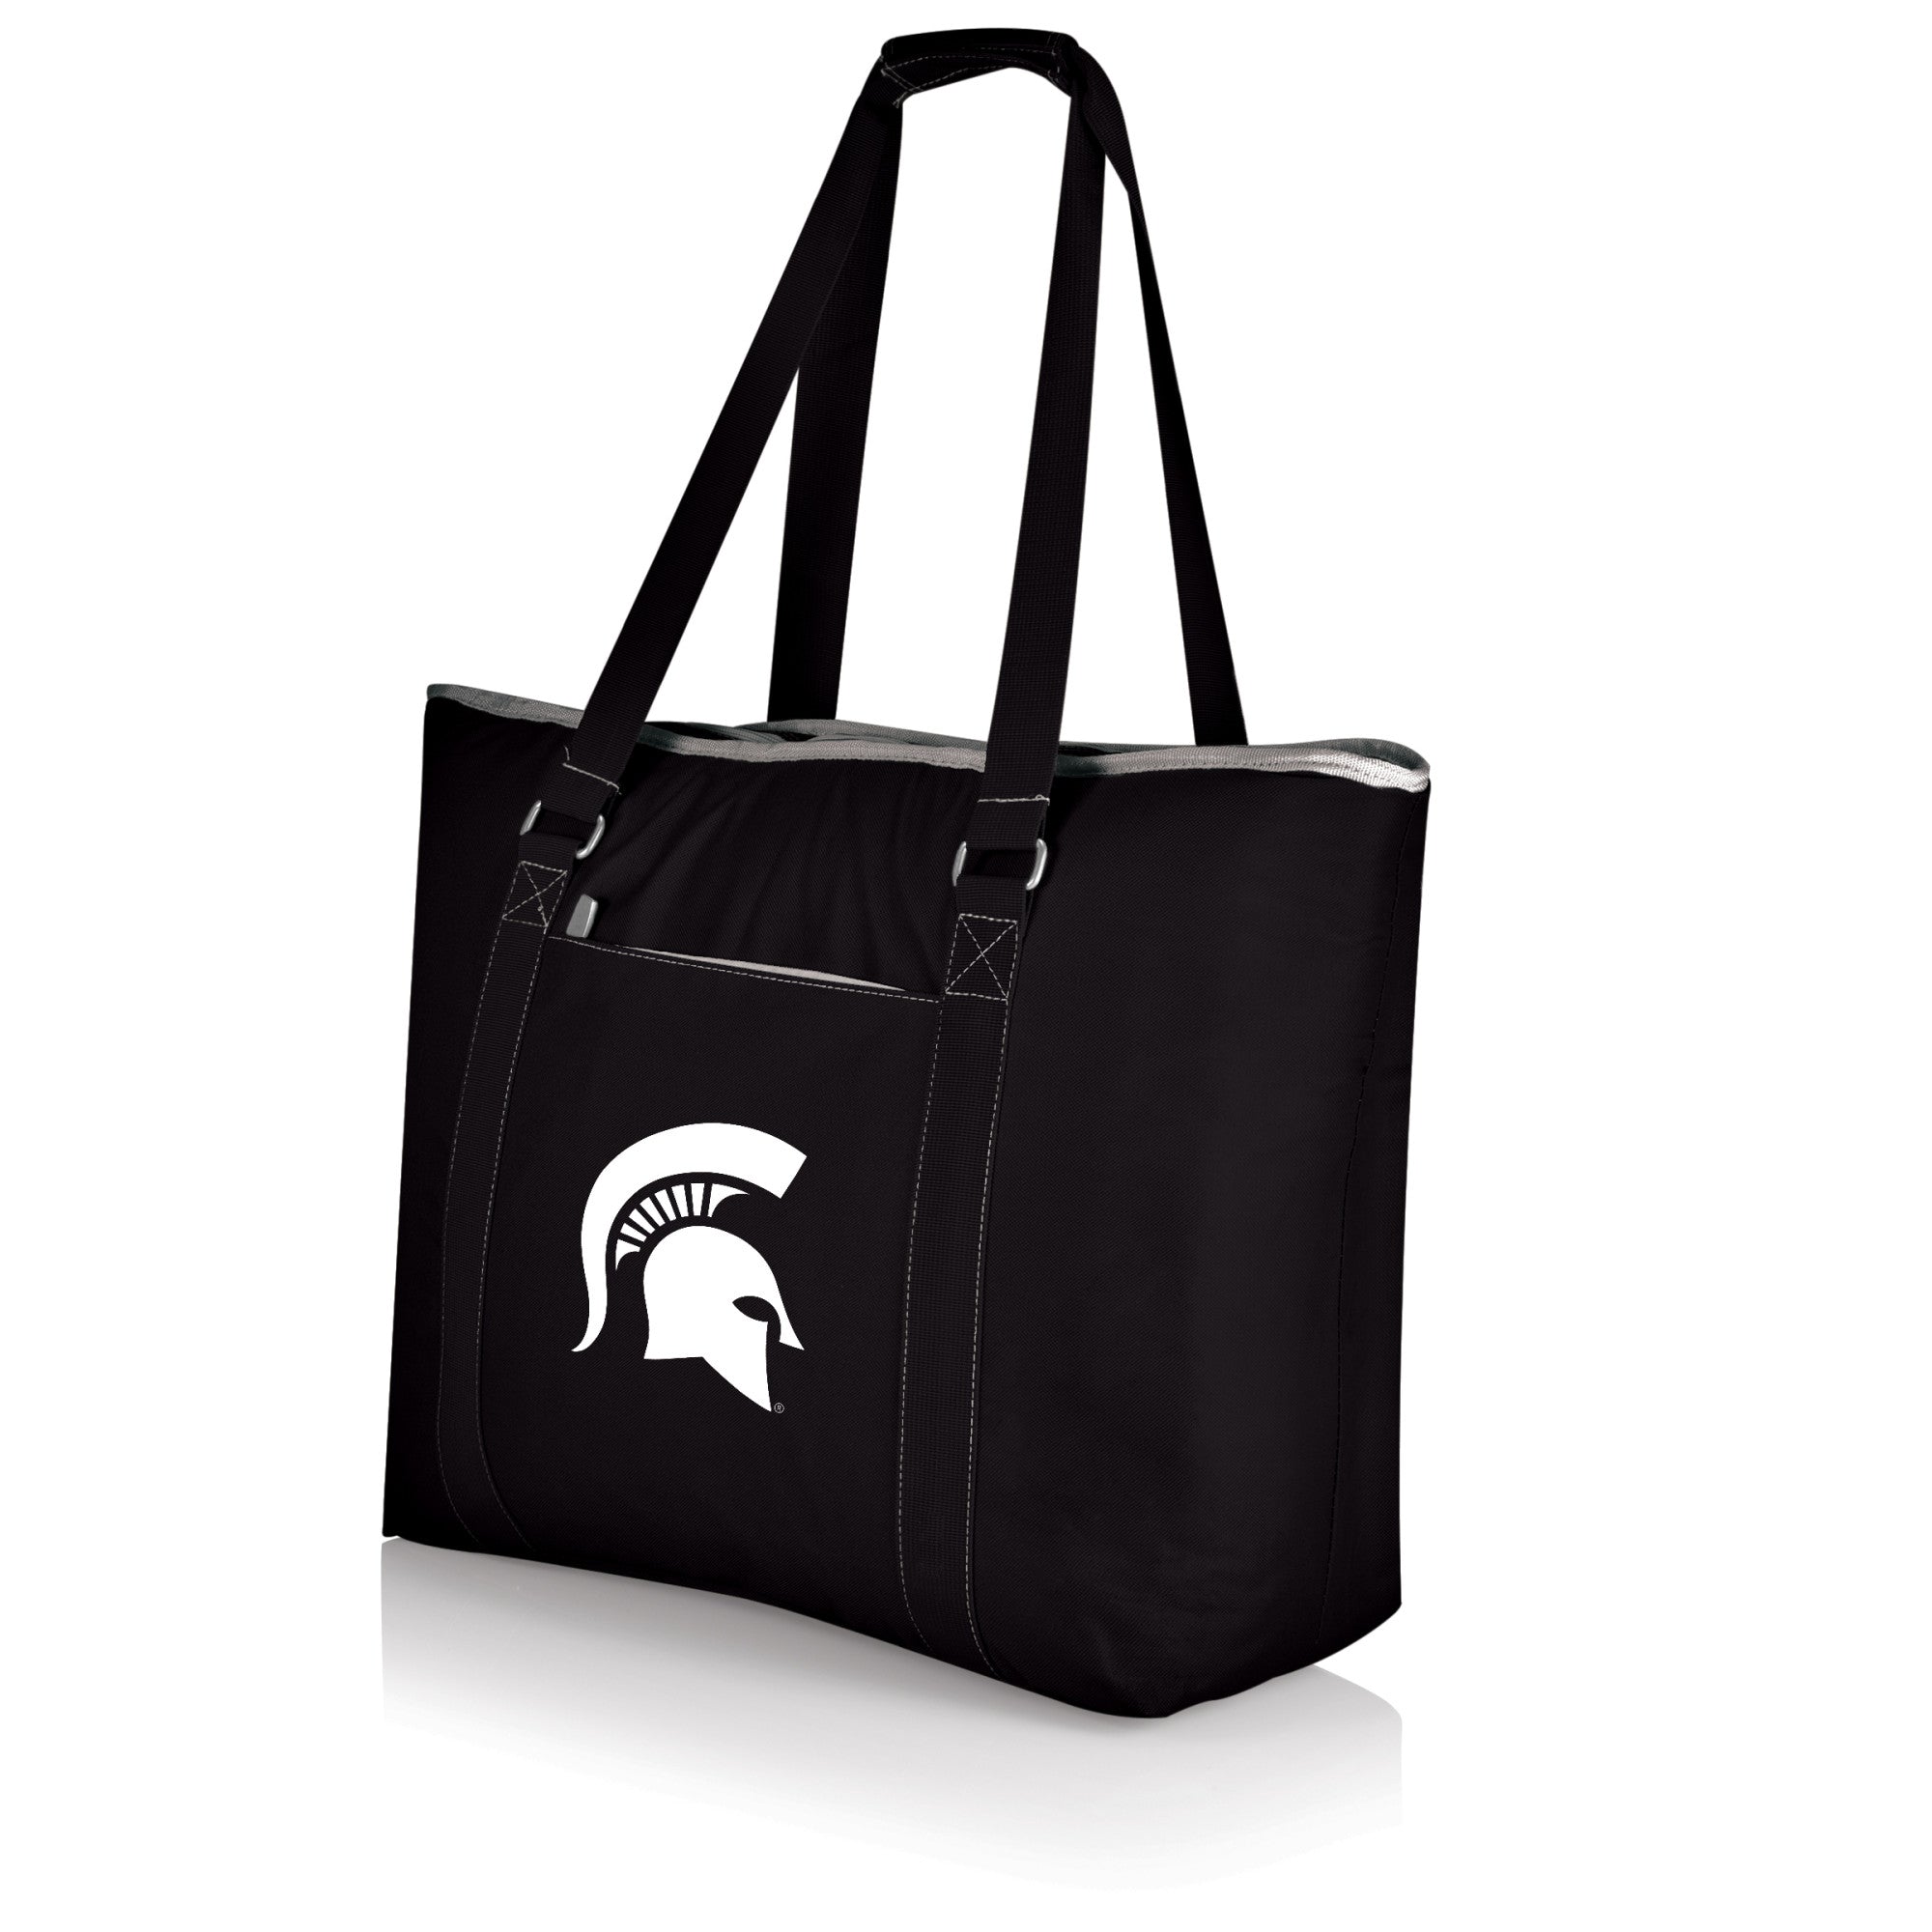 Michigan State Spartans - Tahoe XL Cooler Tote Bag